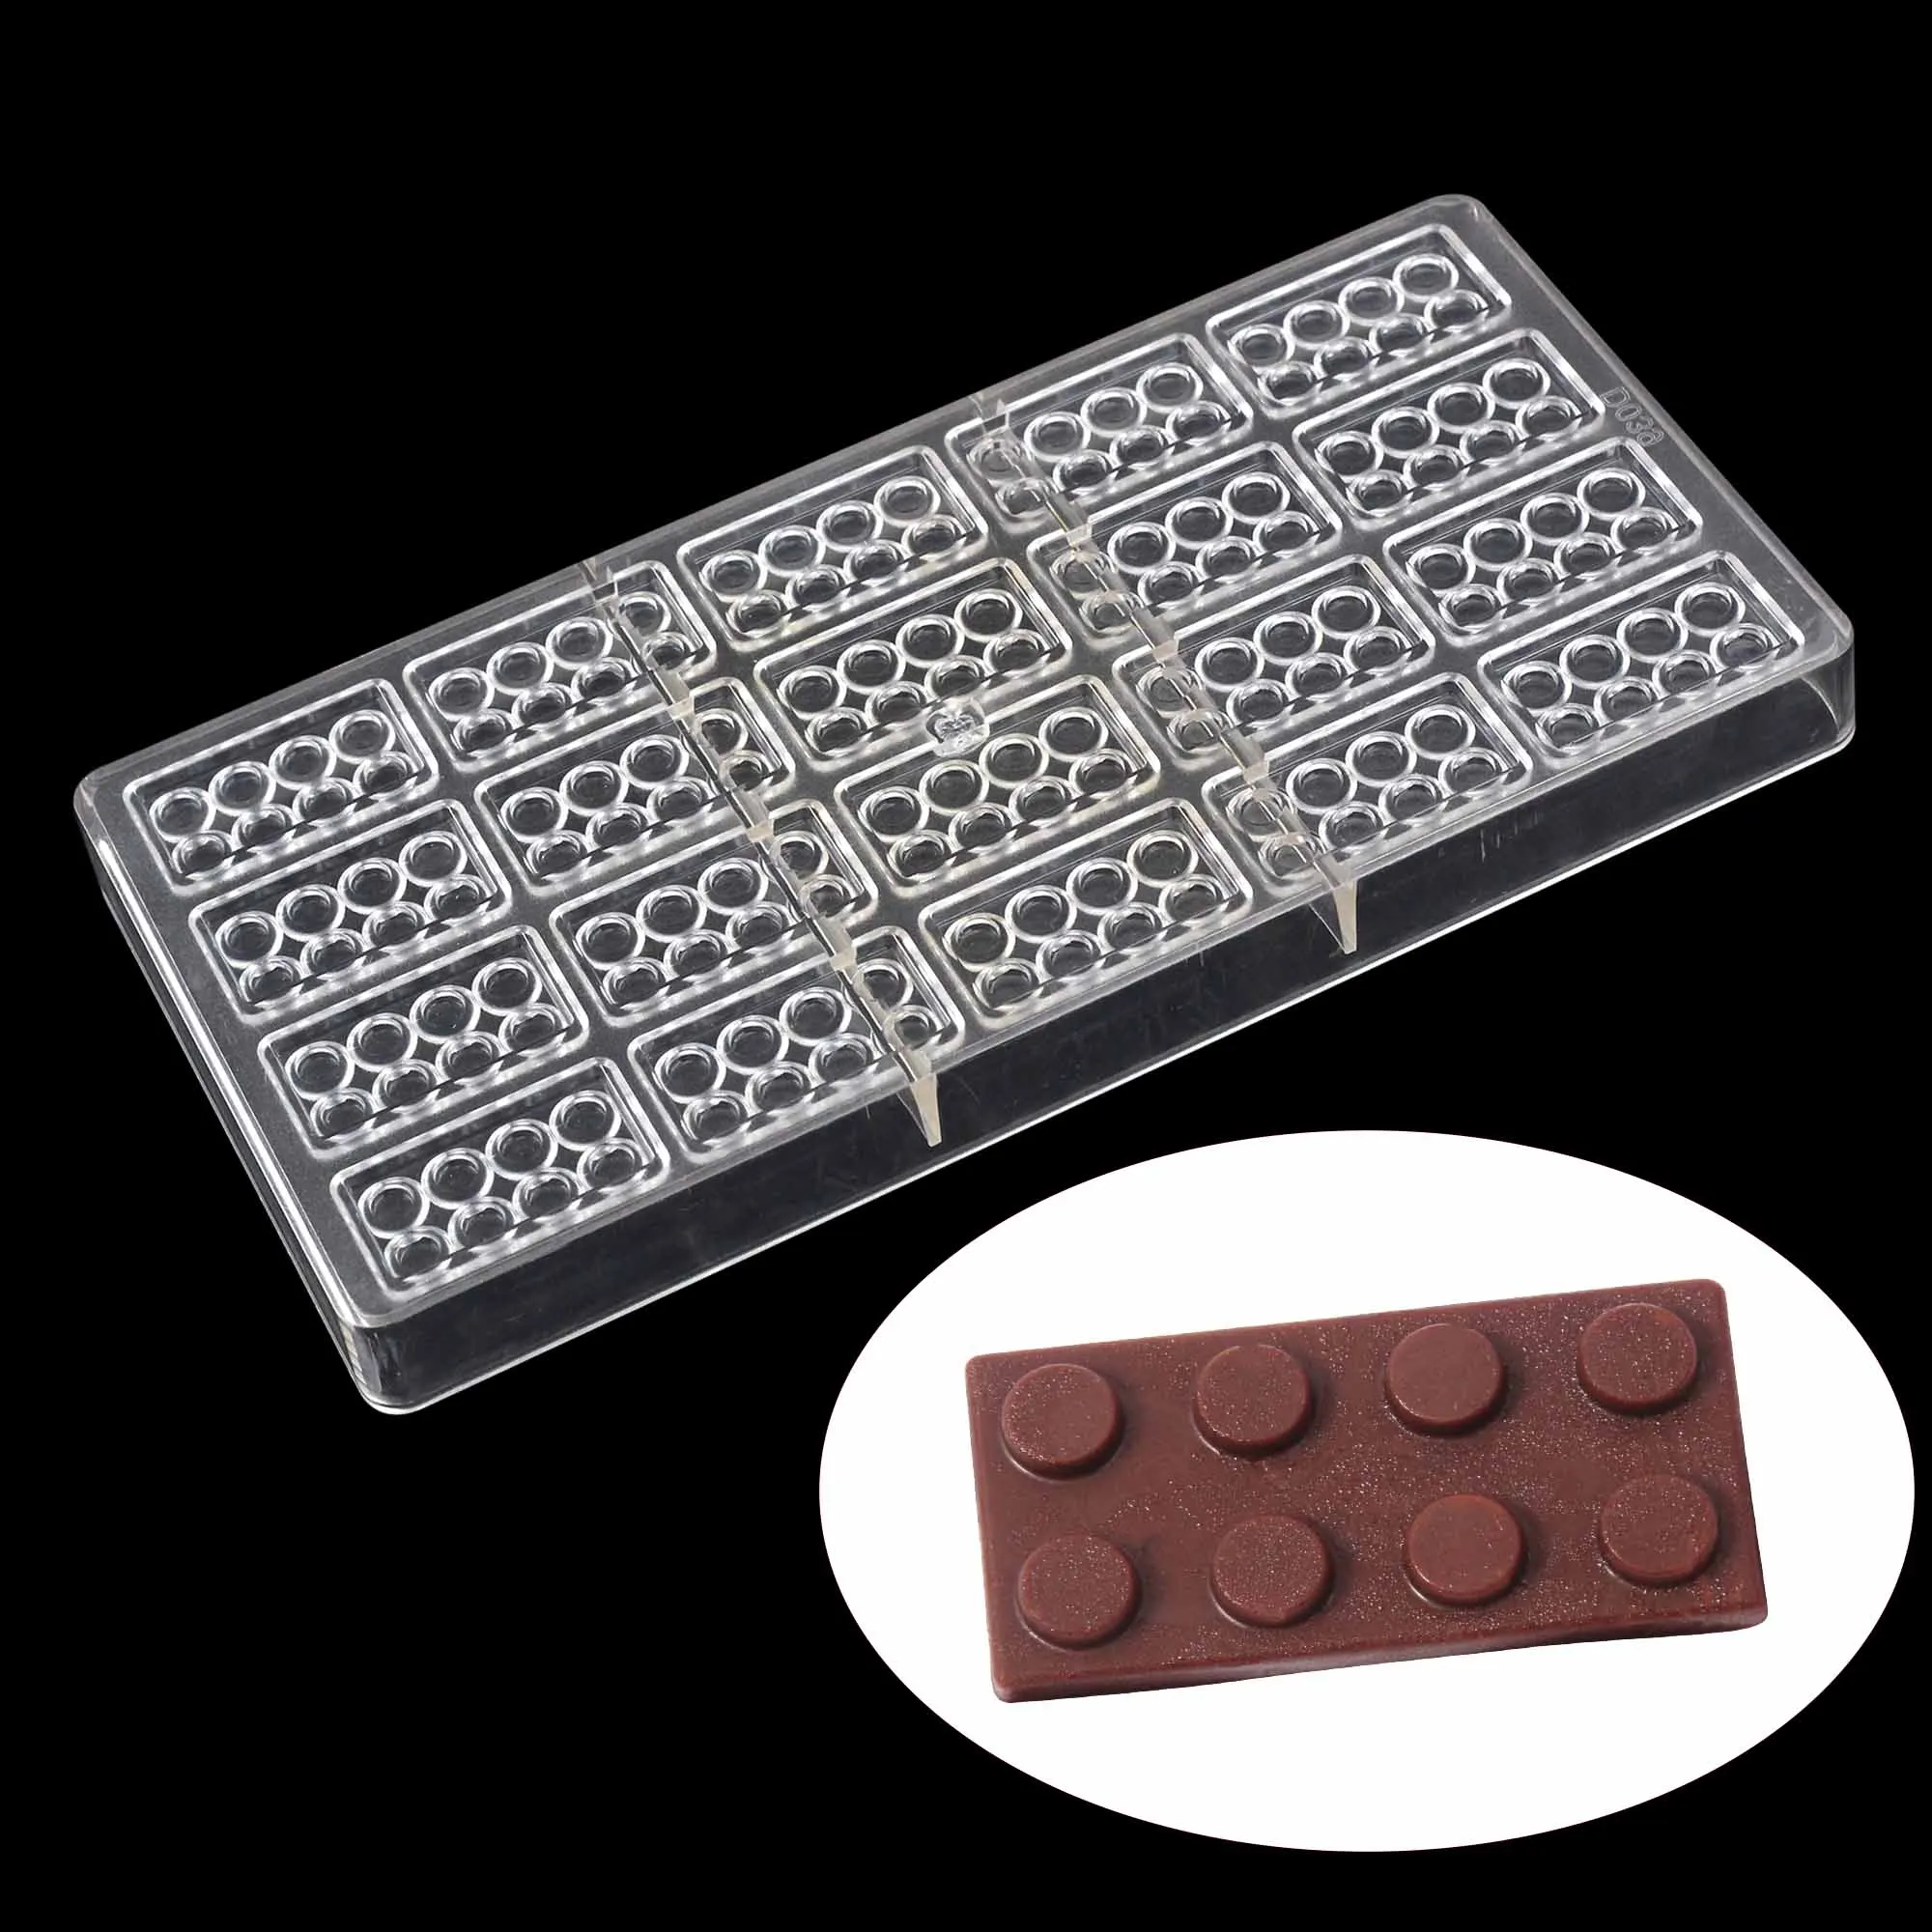 S Chocolate Mold Polycarbonate Chocolate Mould New Design Baking Molds 